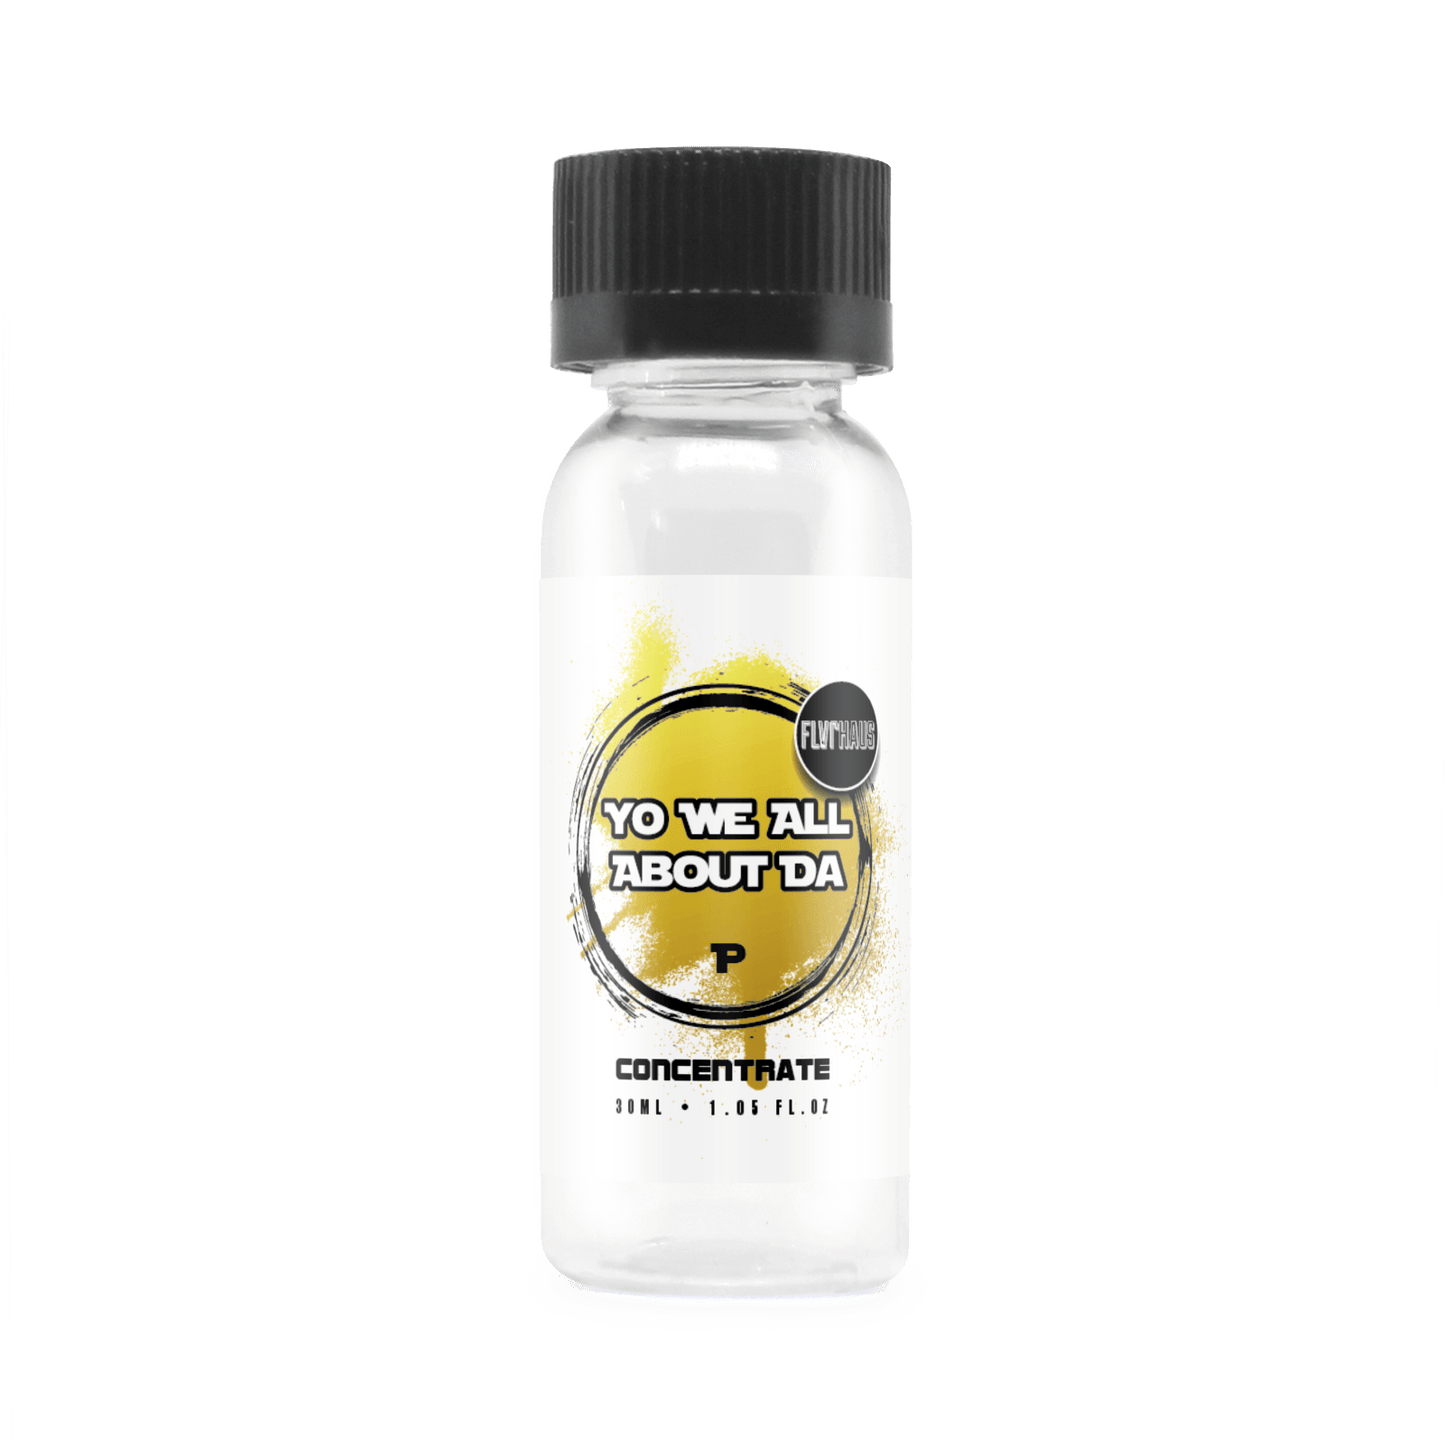 Cloud Chasers - Yoda Babies 30ml Concentrate by FLVRHAUS - The Ace Of Vapez